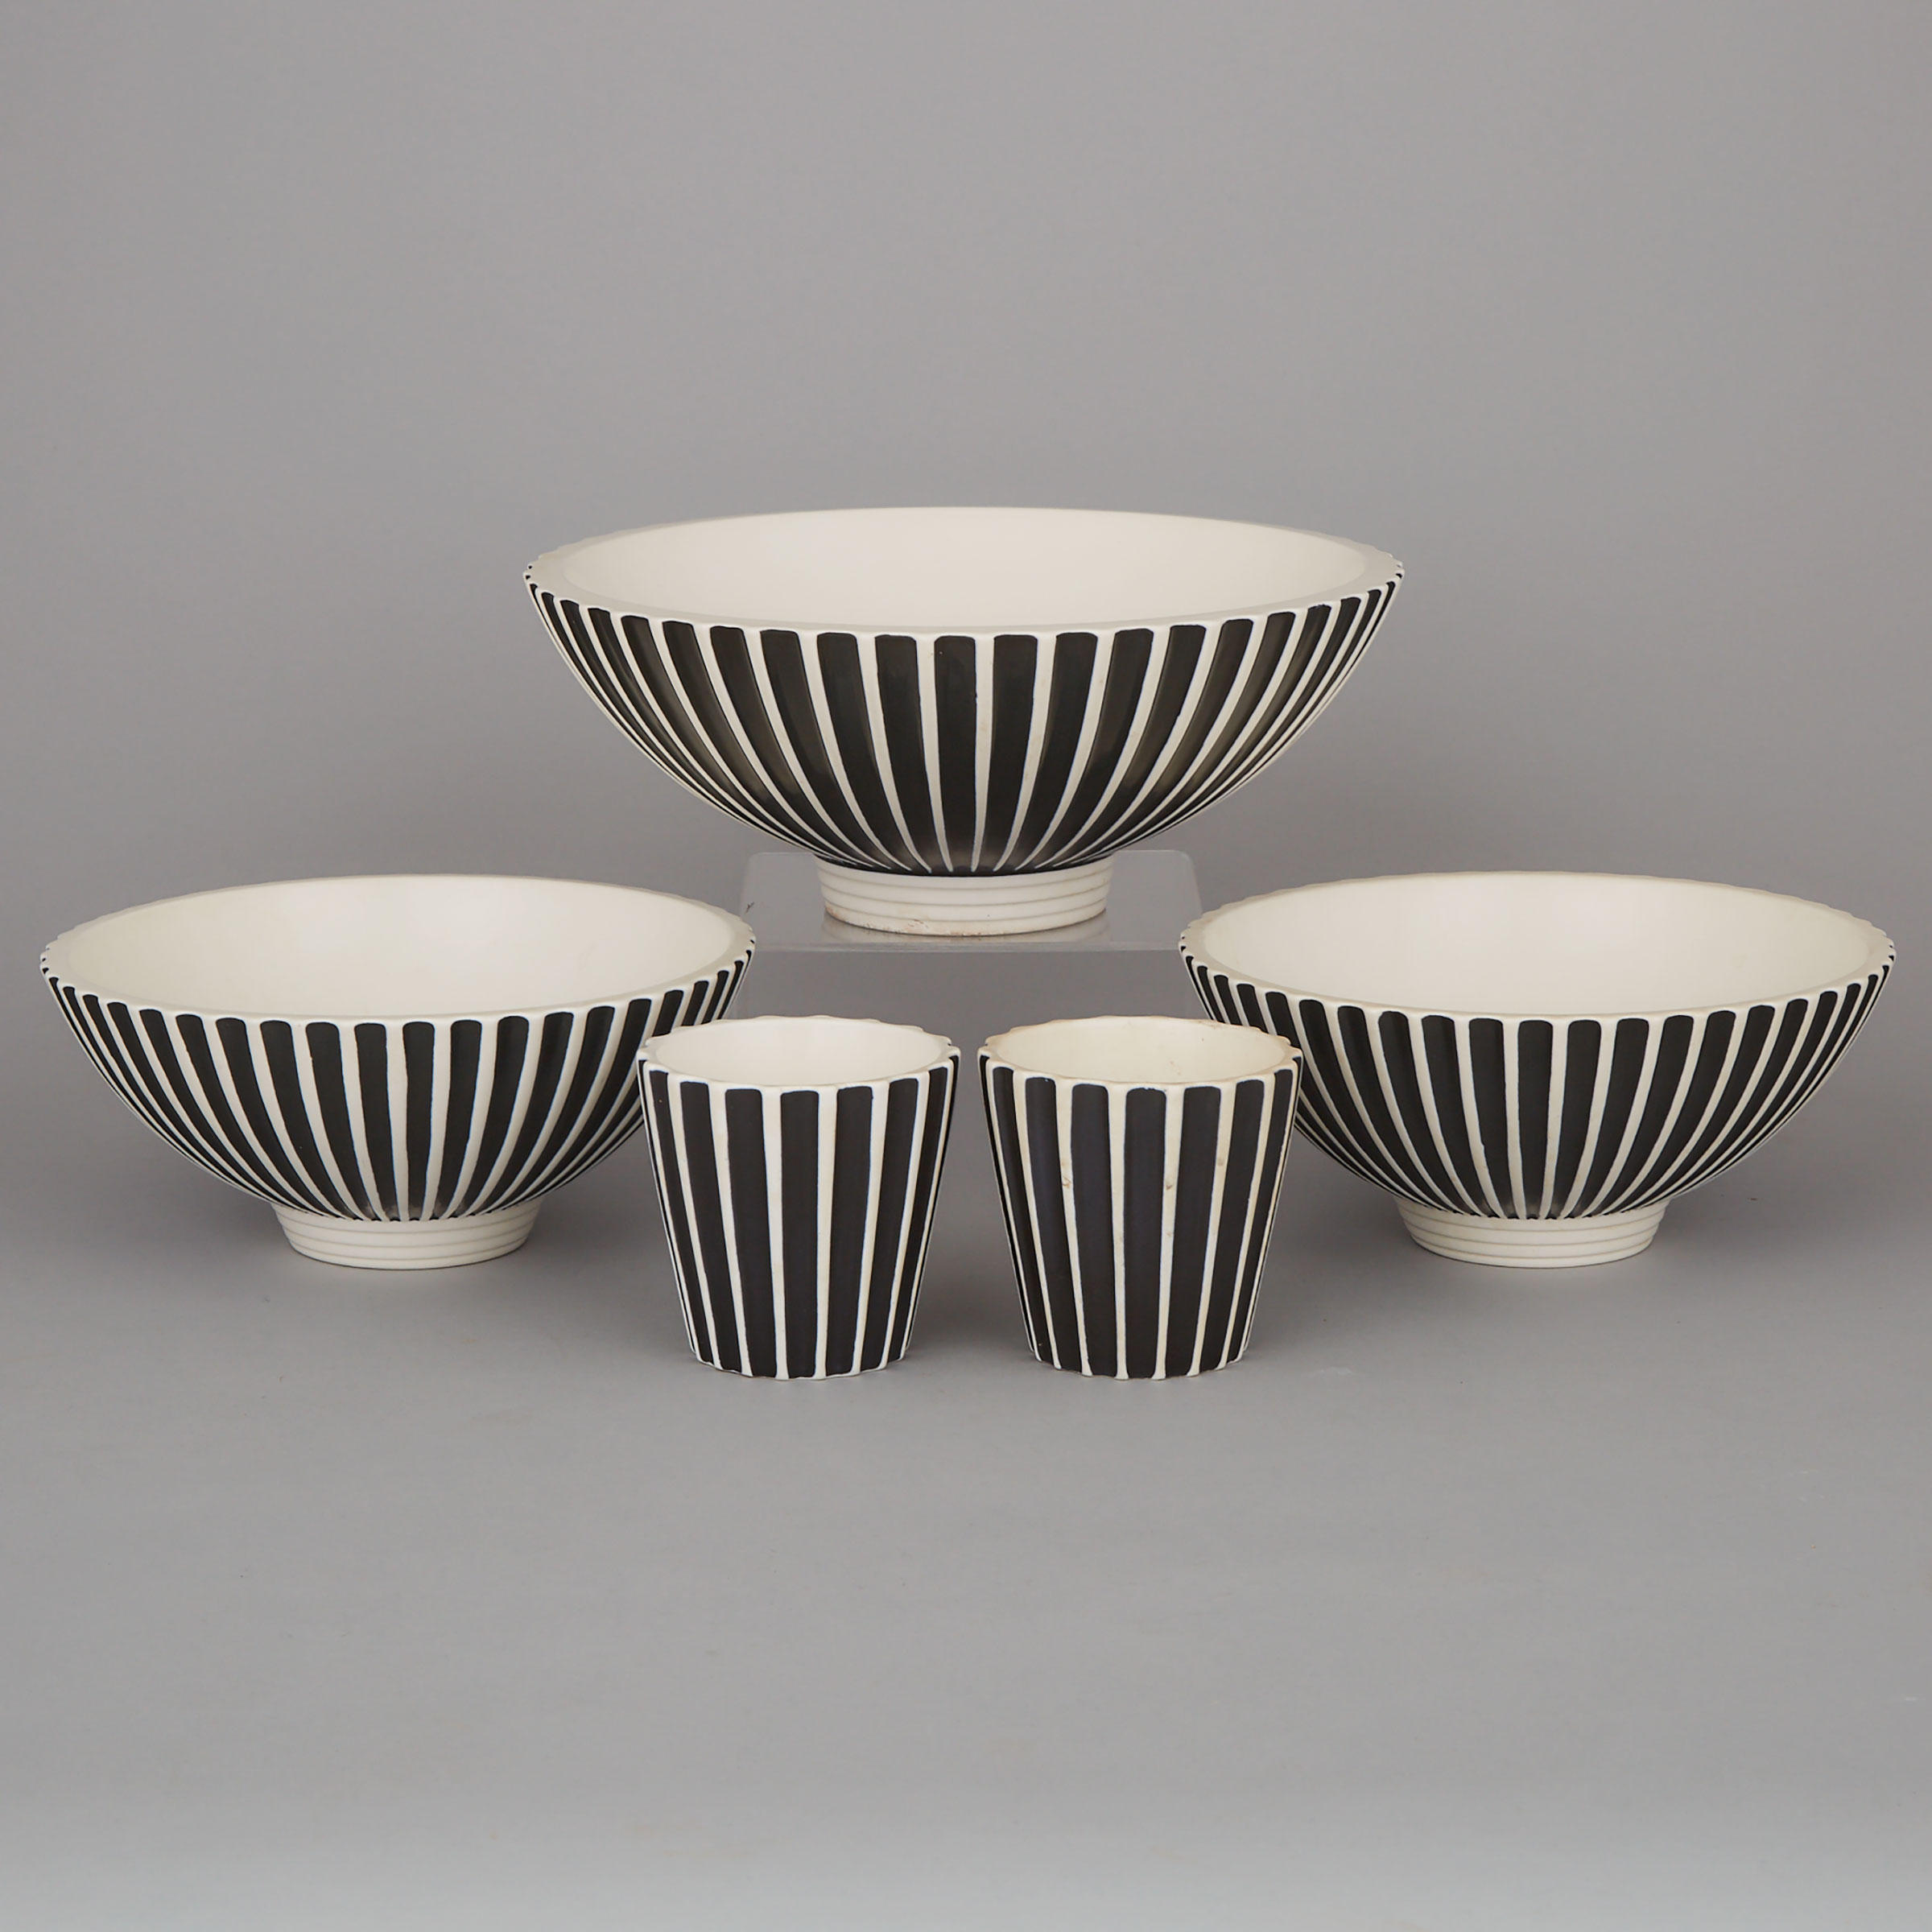 Three Wedgwood Fluted Bowls and a Pair of Vases, Norman Wilson, mid-20th century